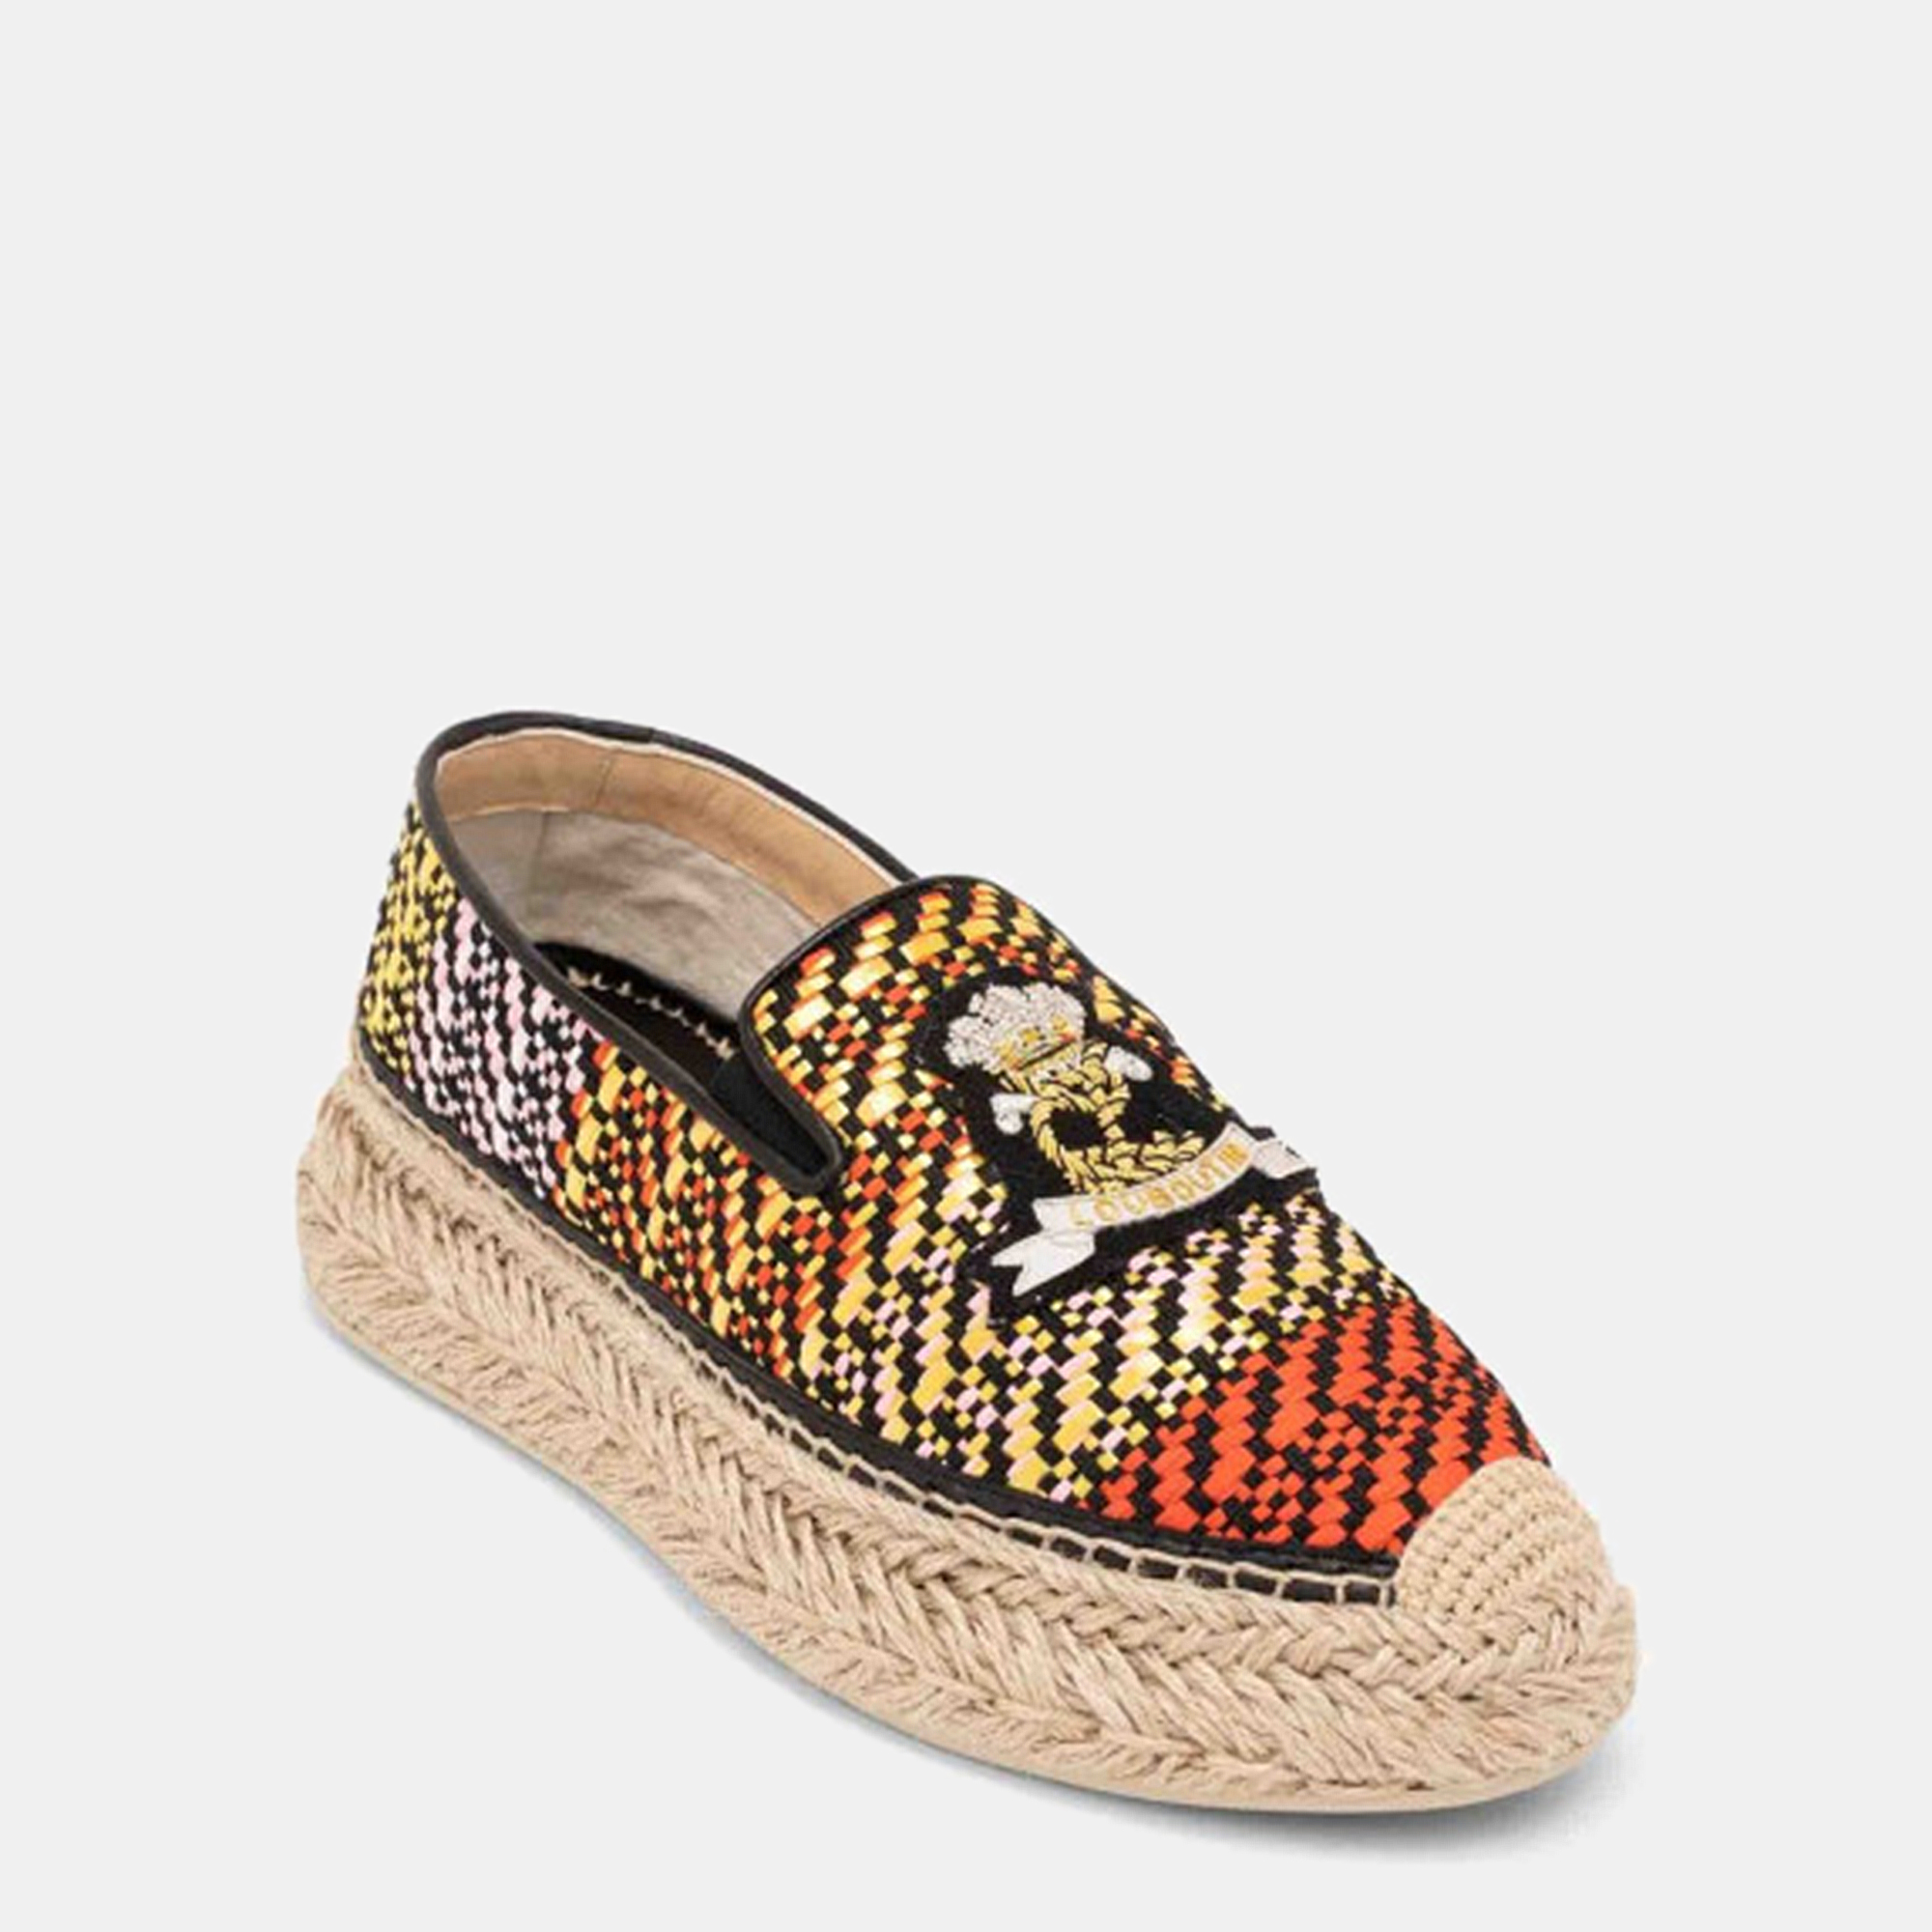 Christian Louboutin Multicolour Canvas Loafers Size 40